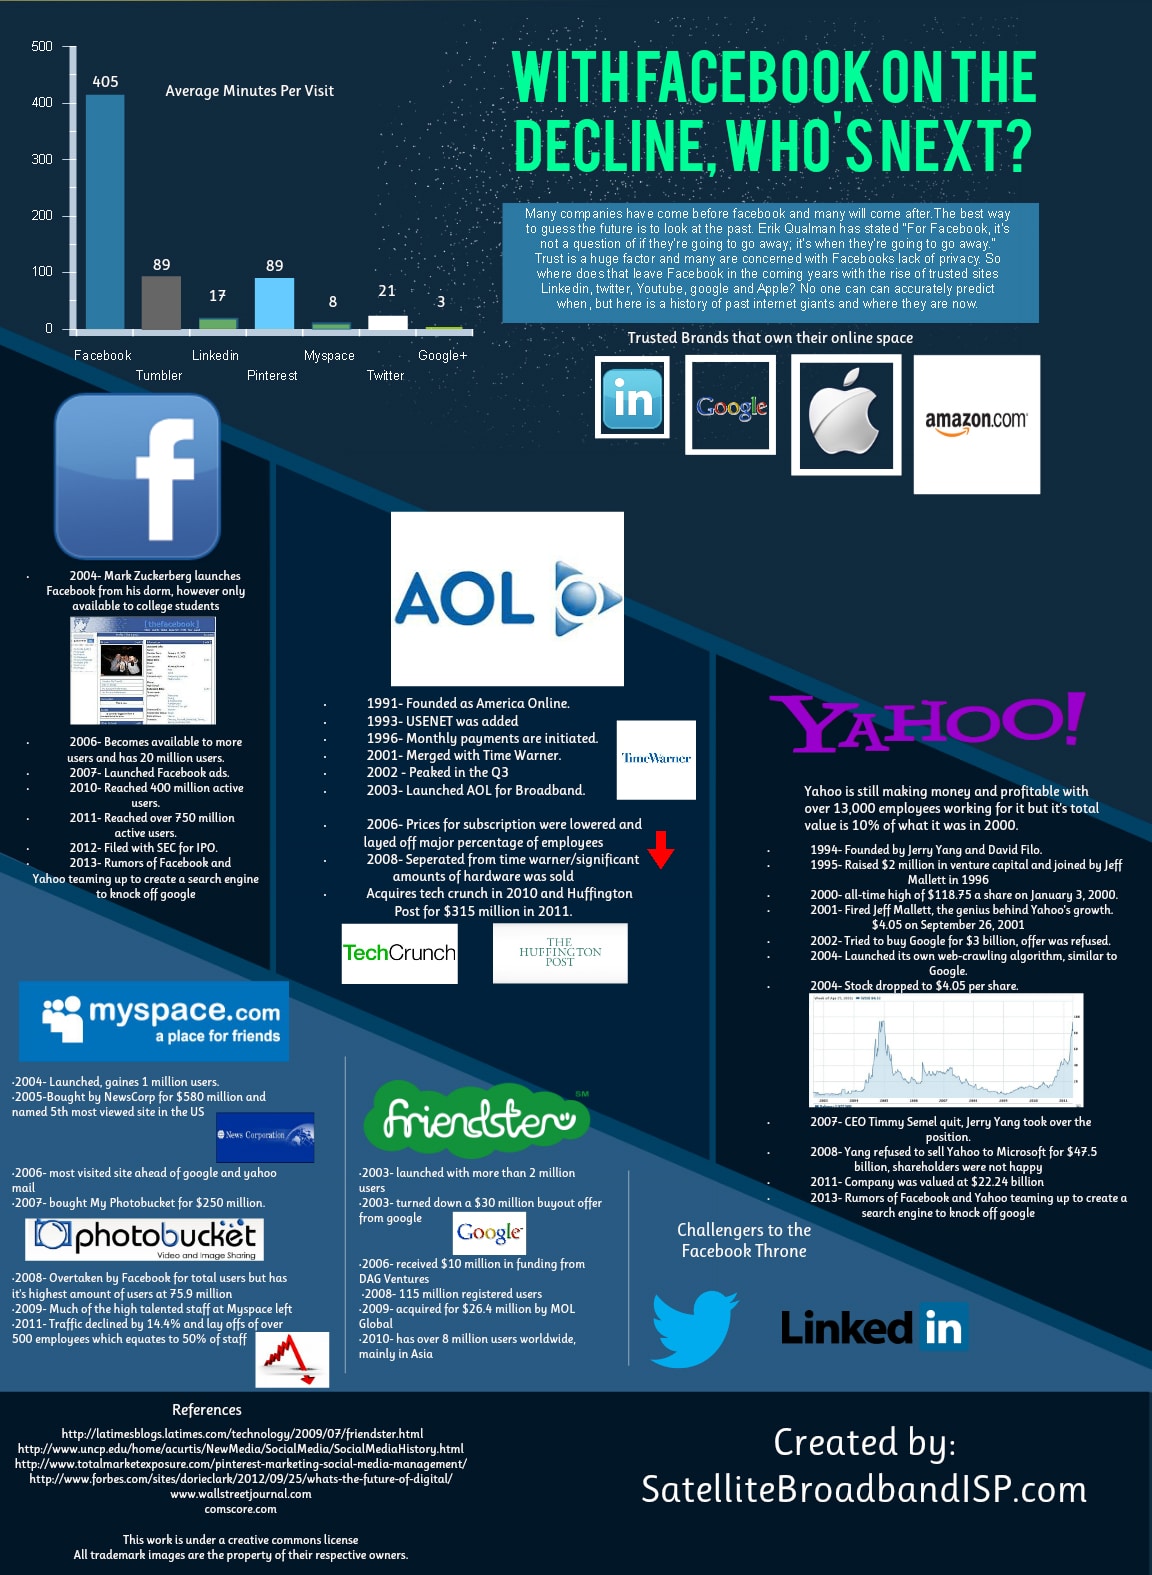 Facebook Usage Is On The Decline…So Who’s Next? [Infographic]